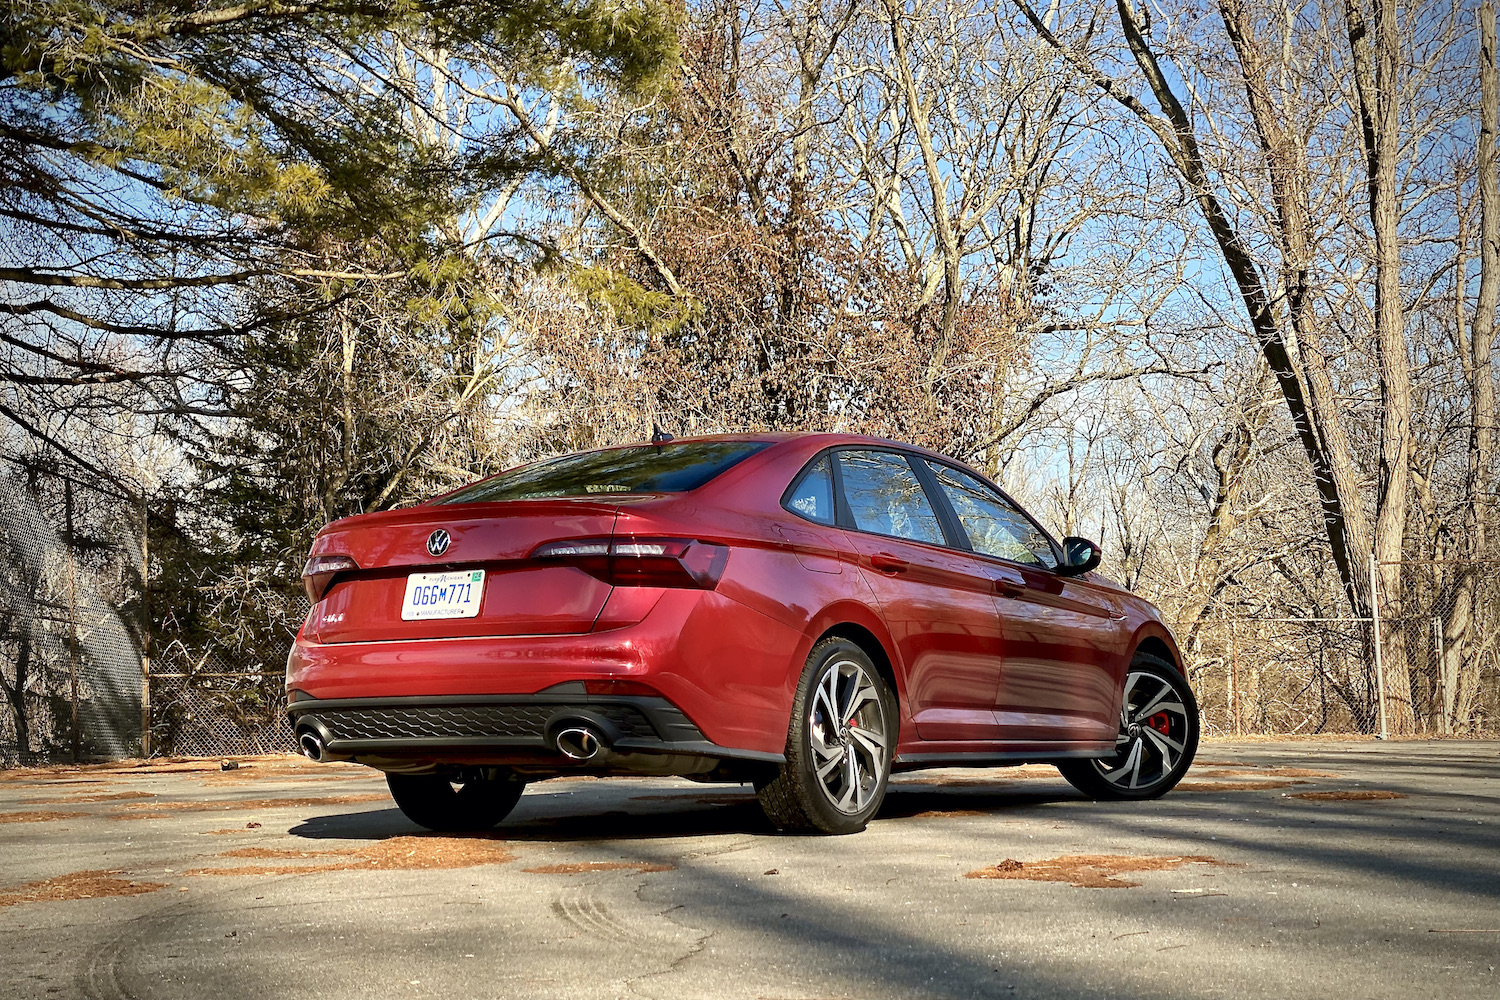 Rear end of 2022 Volkswagen Jetta from the passenger's side with trees in the background.